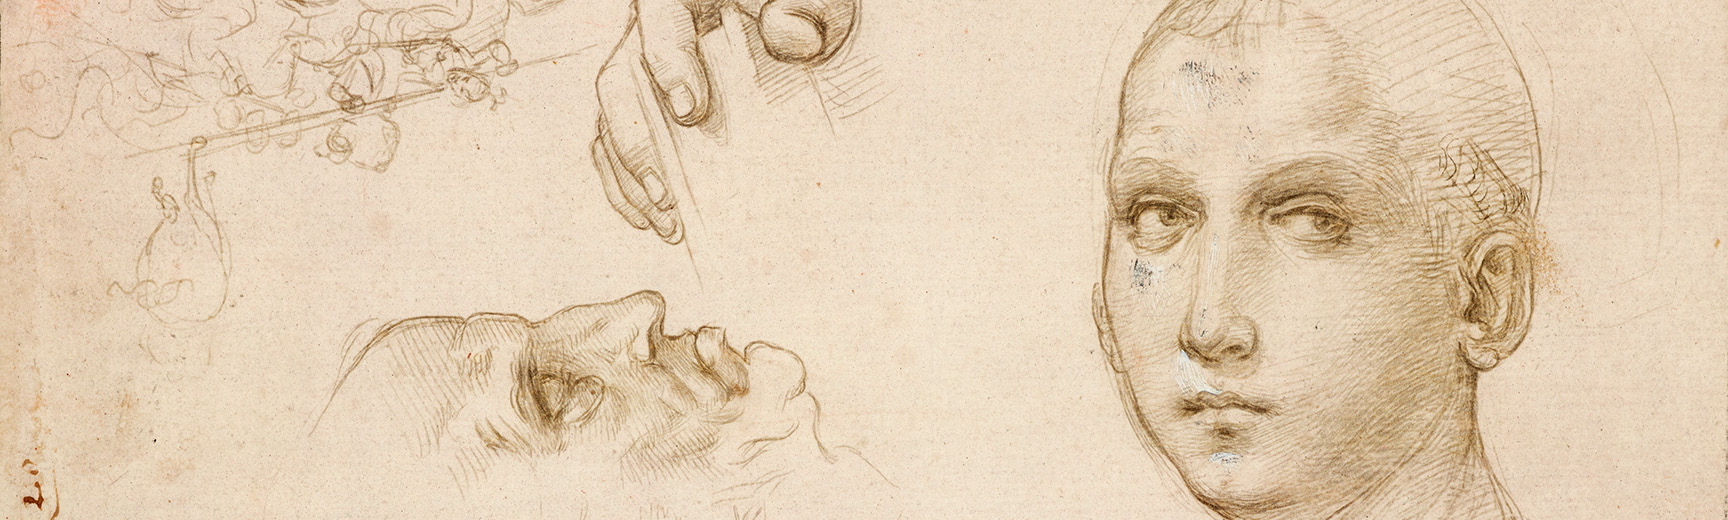 Raphael's Studies for the Trinity of St Severo and sketches after Leonardo, c. 1505 (a detail)